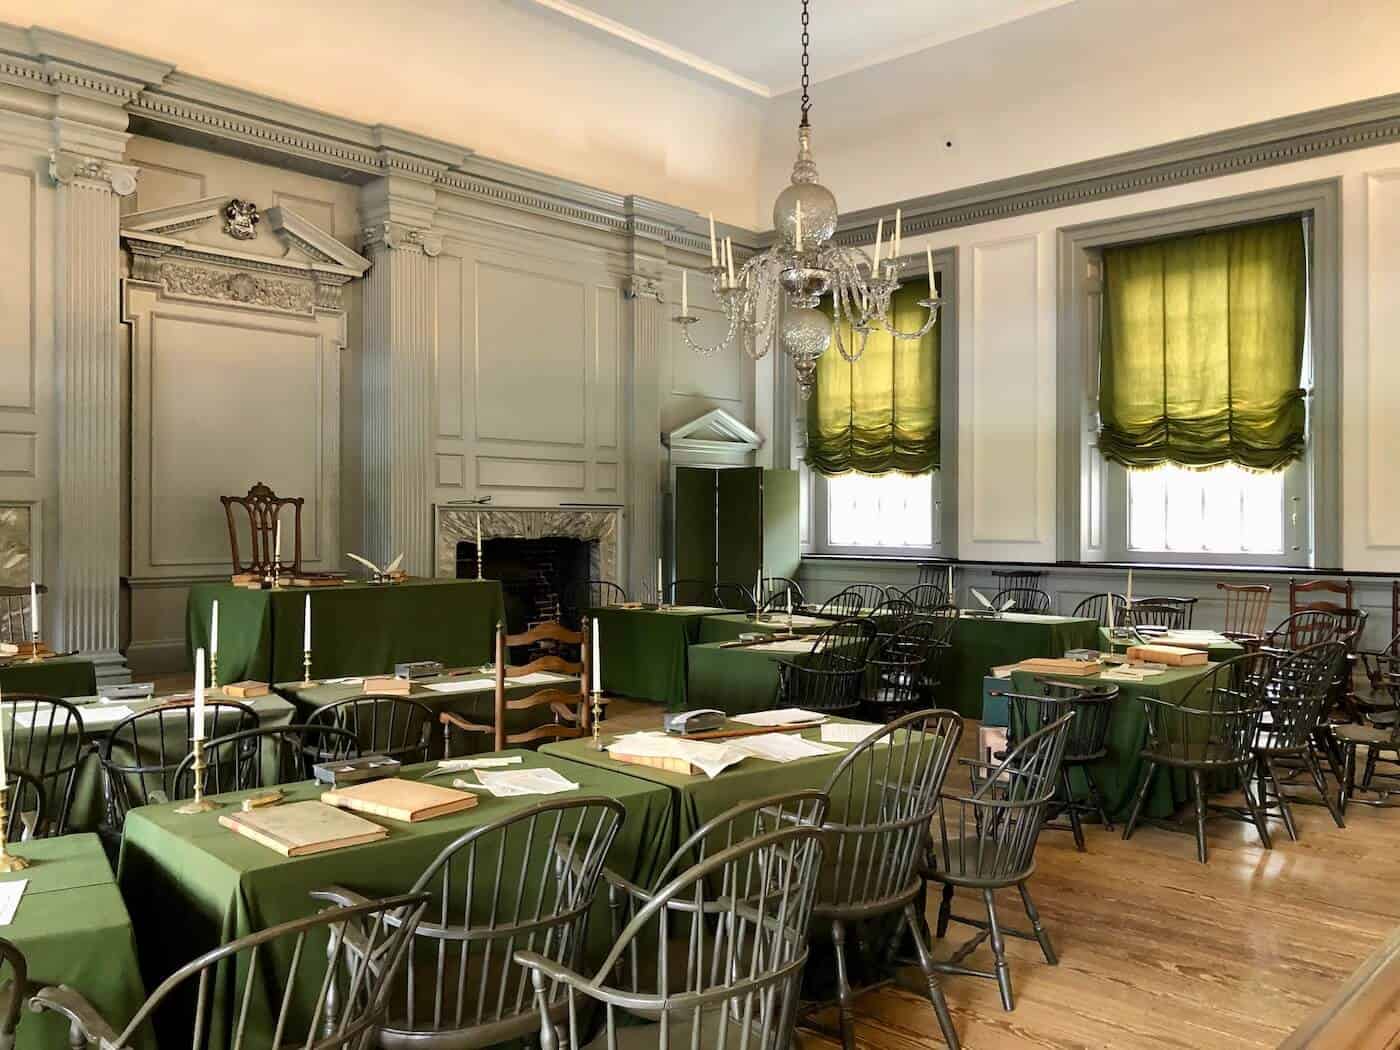 A picture of the inside of Independence Hall in Philadelphia showing the tables and chairs used by the founding fathers.